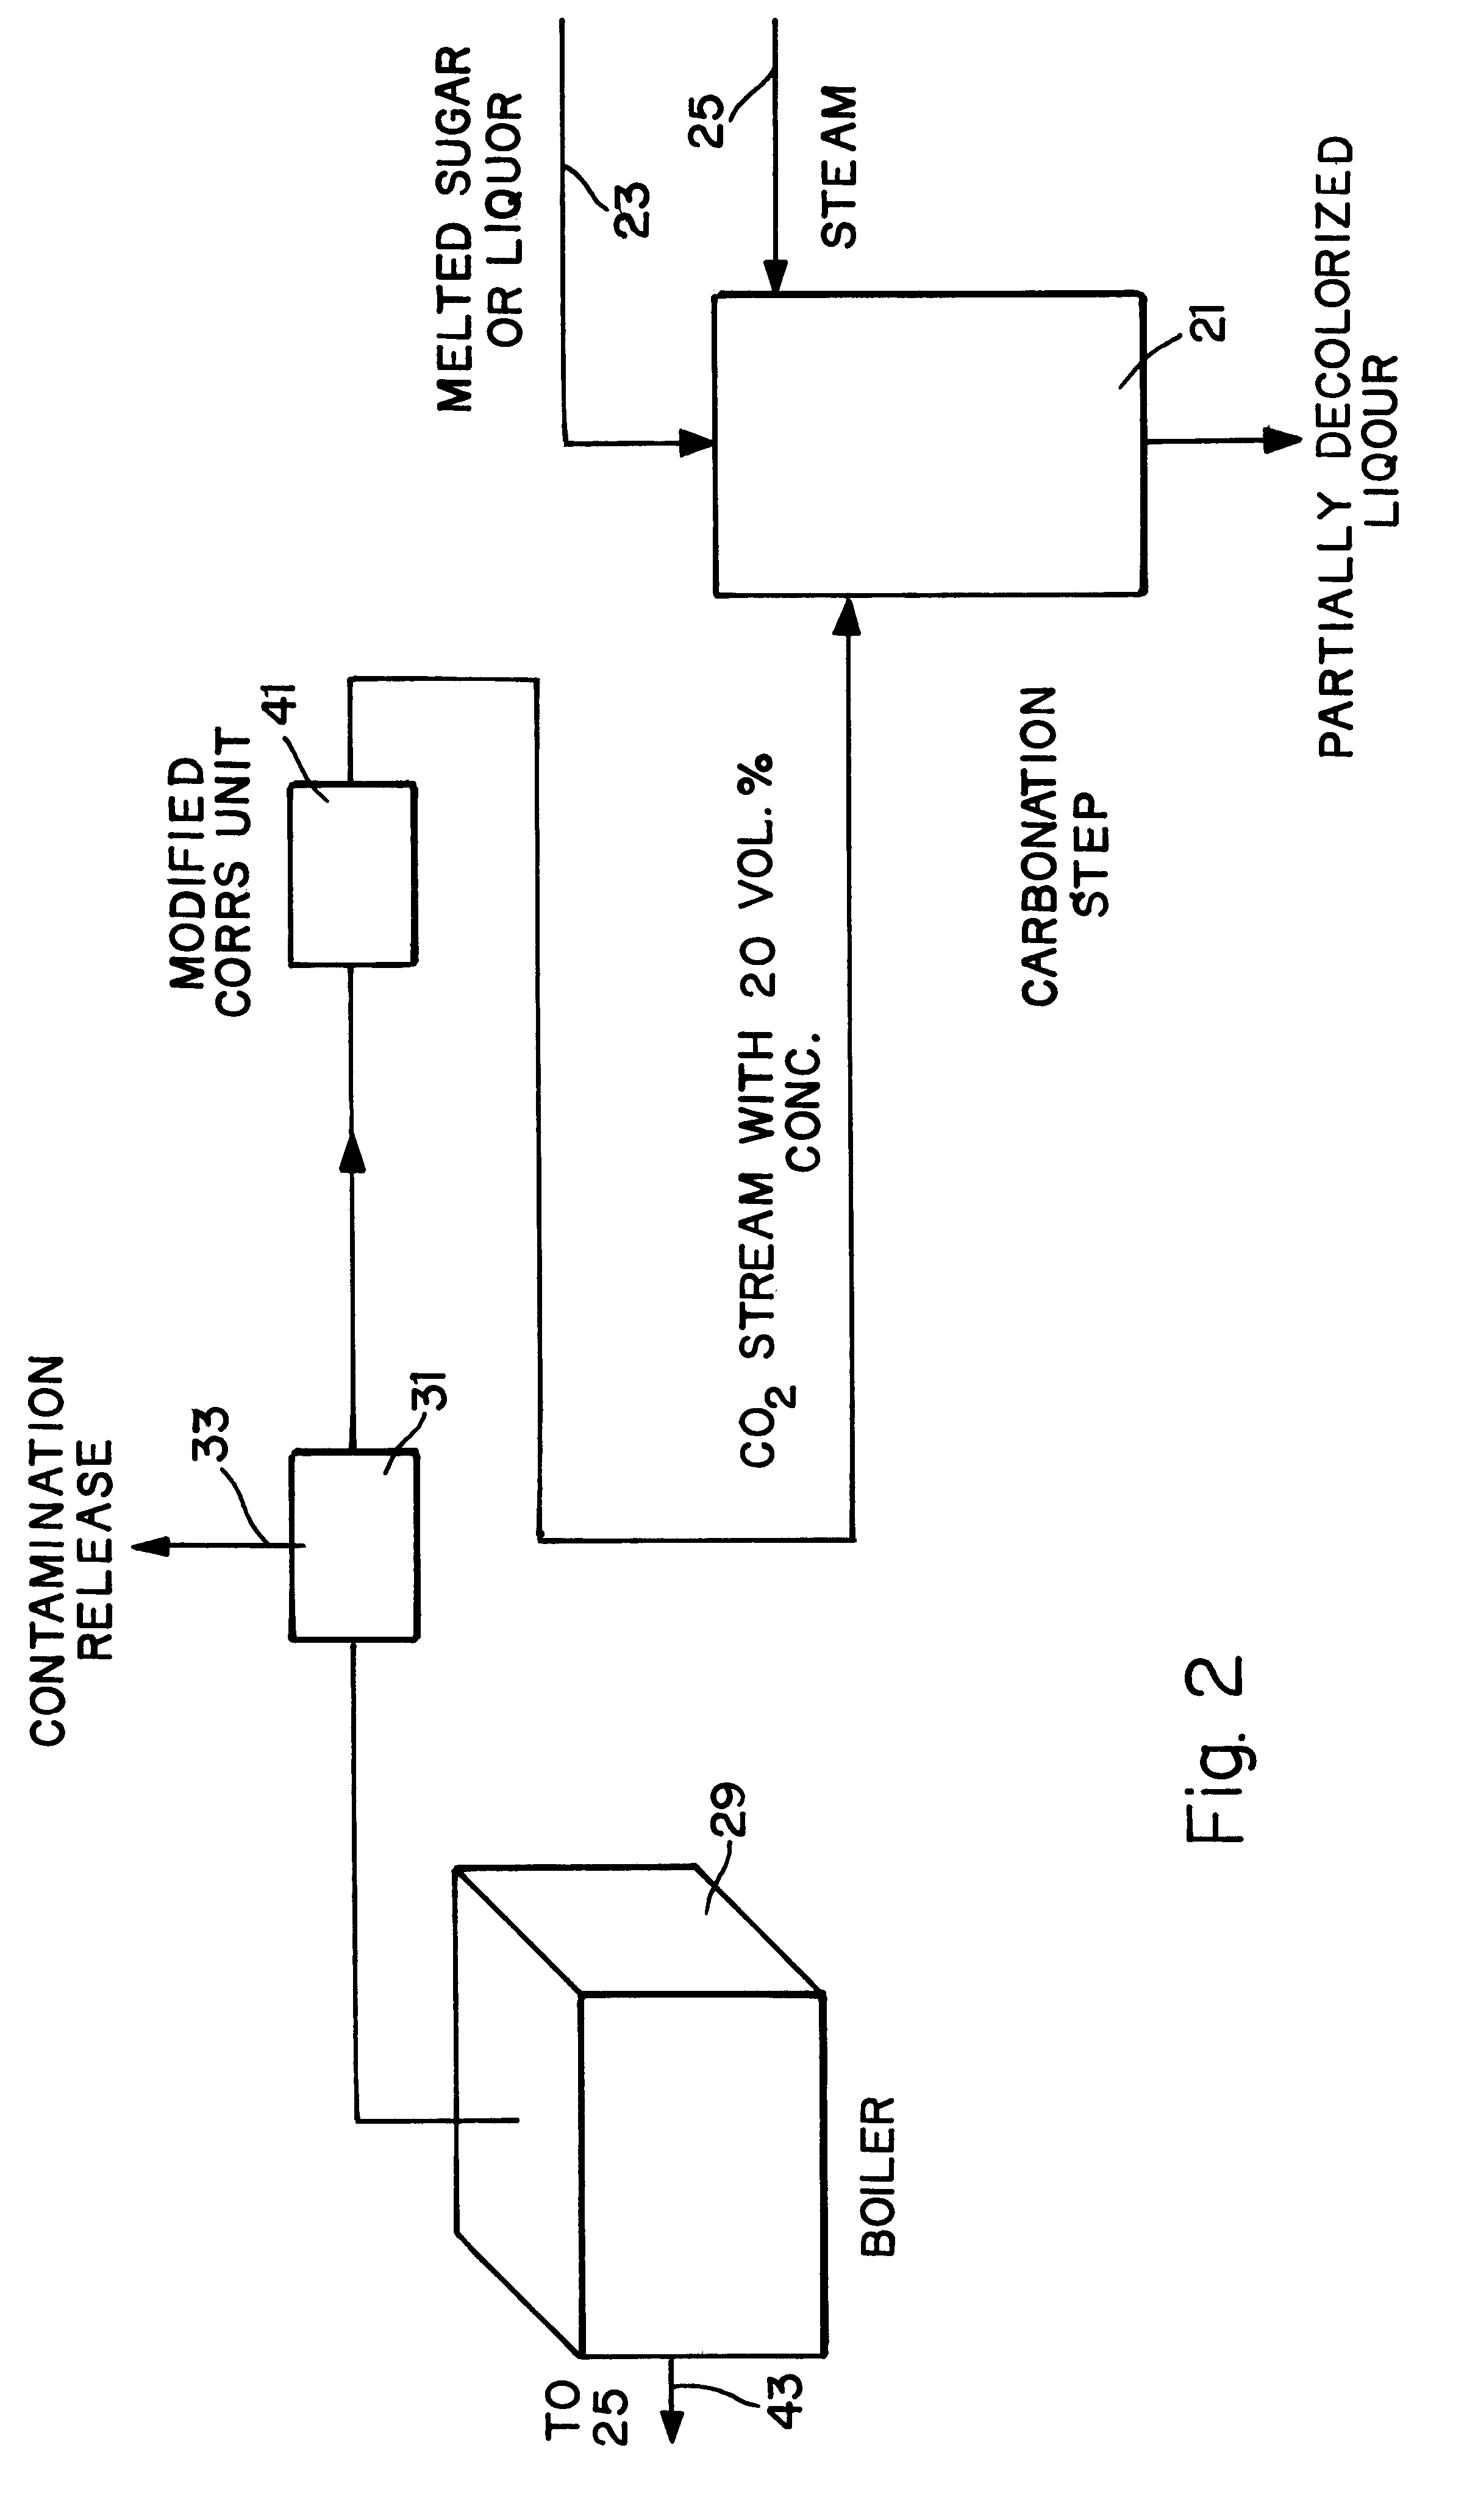 System and method for refining sugar